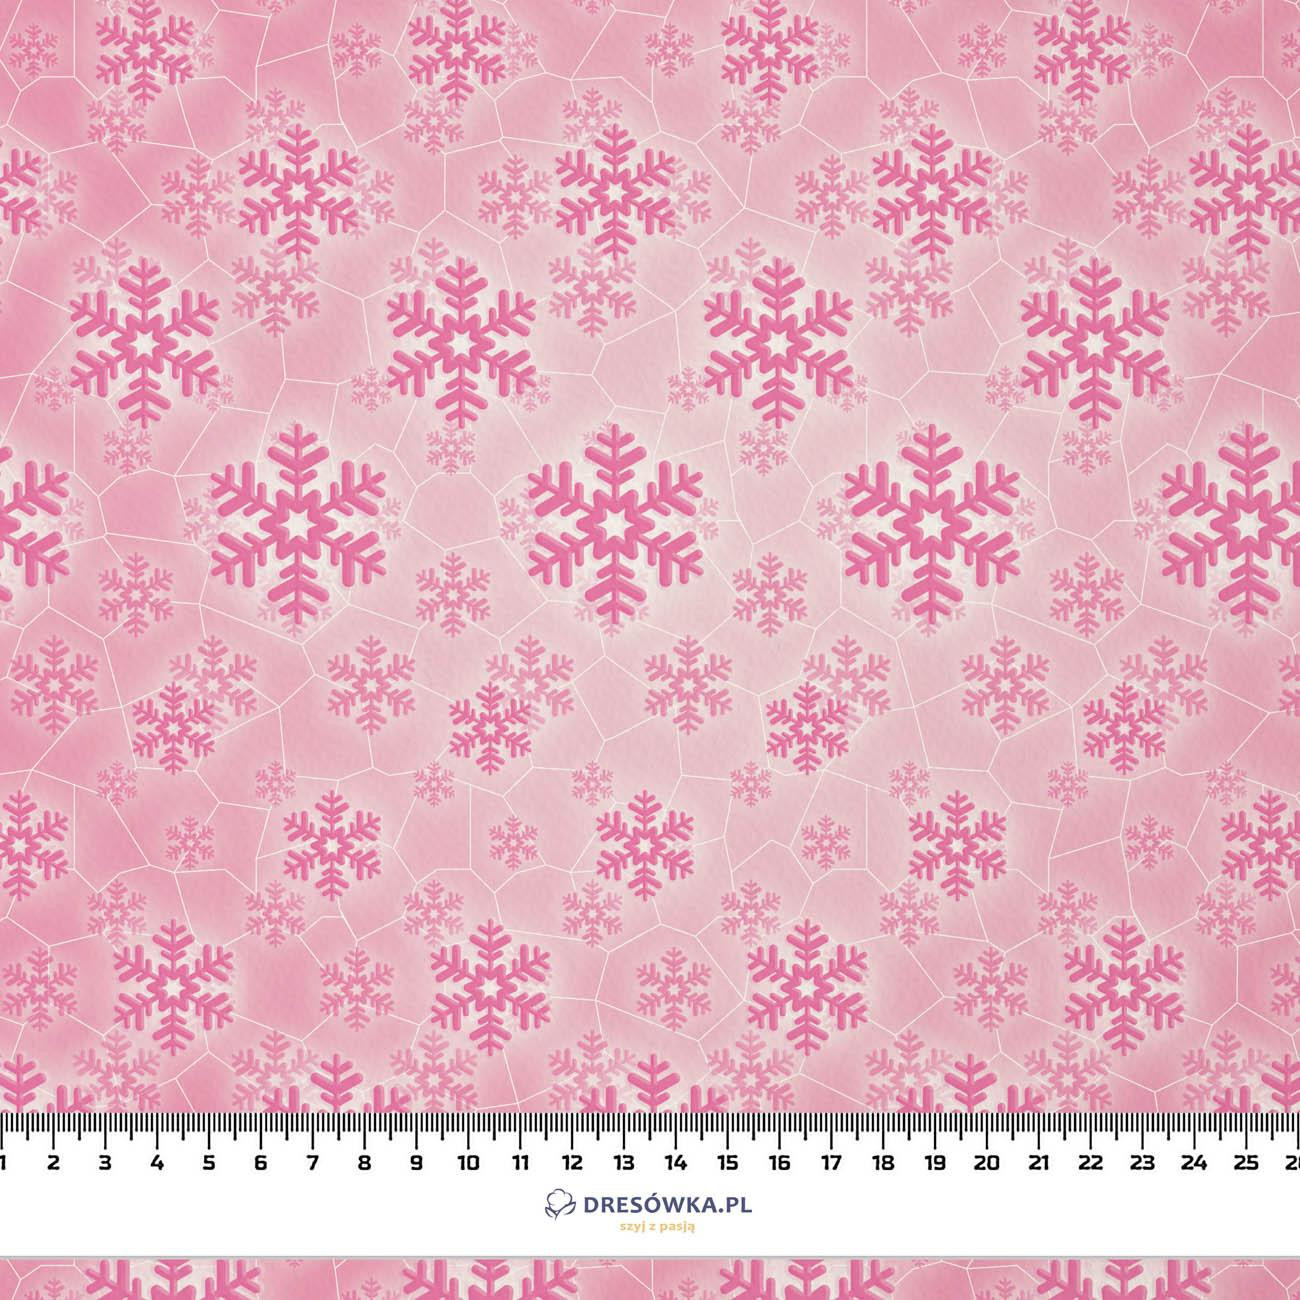 PINK SNOWFLAKES (PENGUINS) - Cotton woven fabric